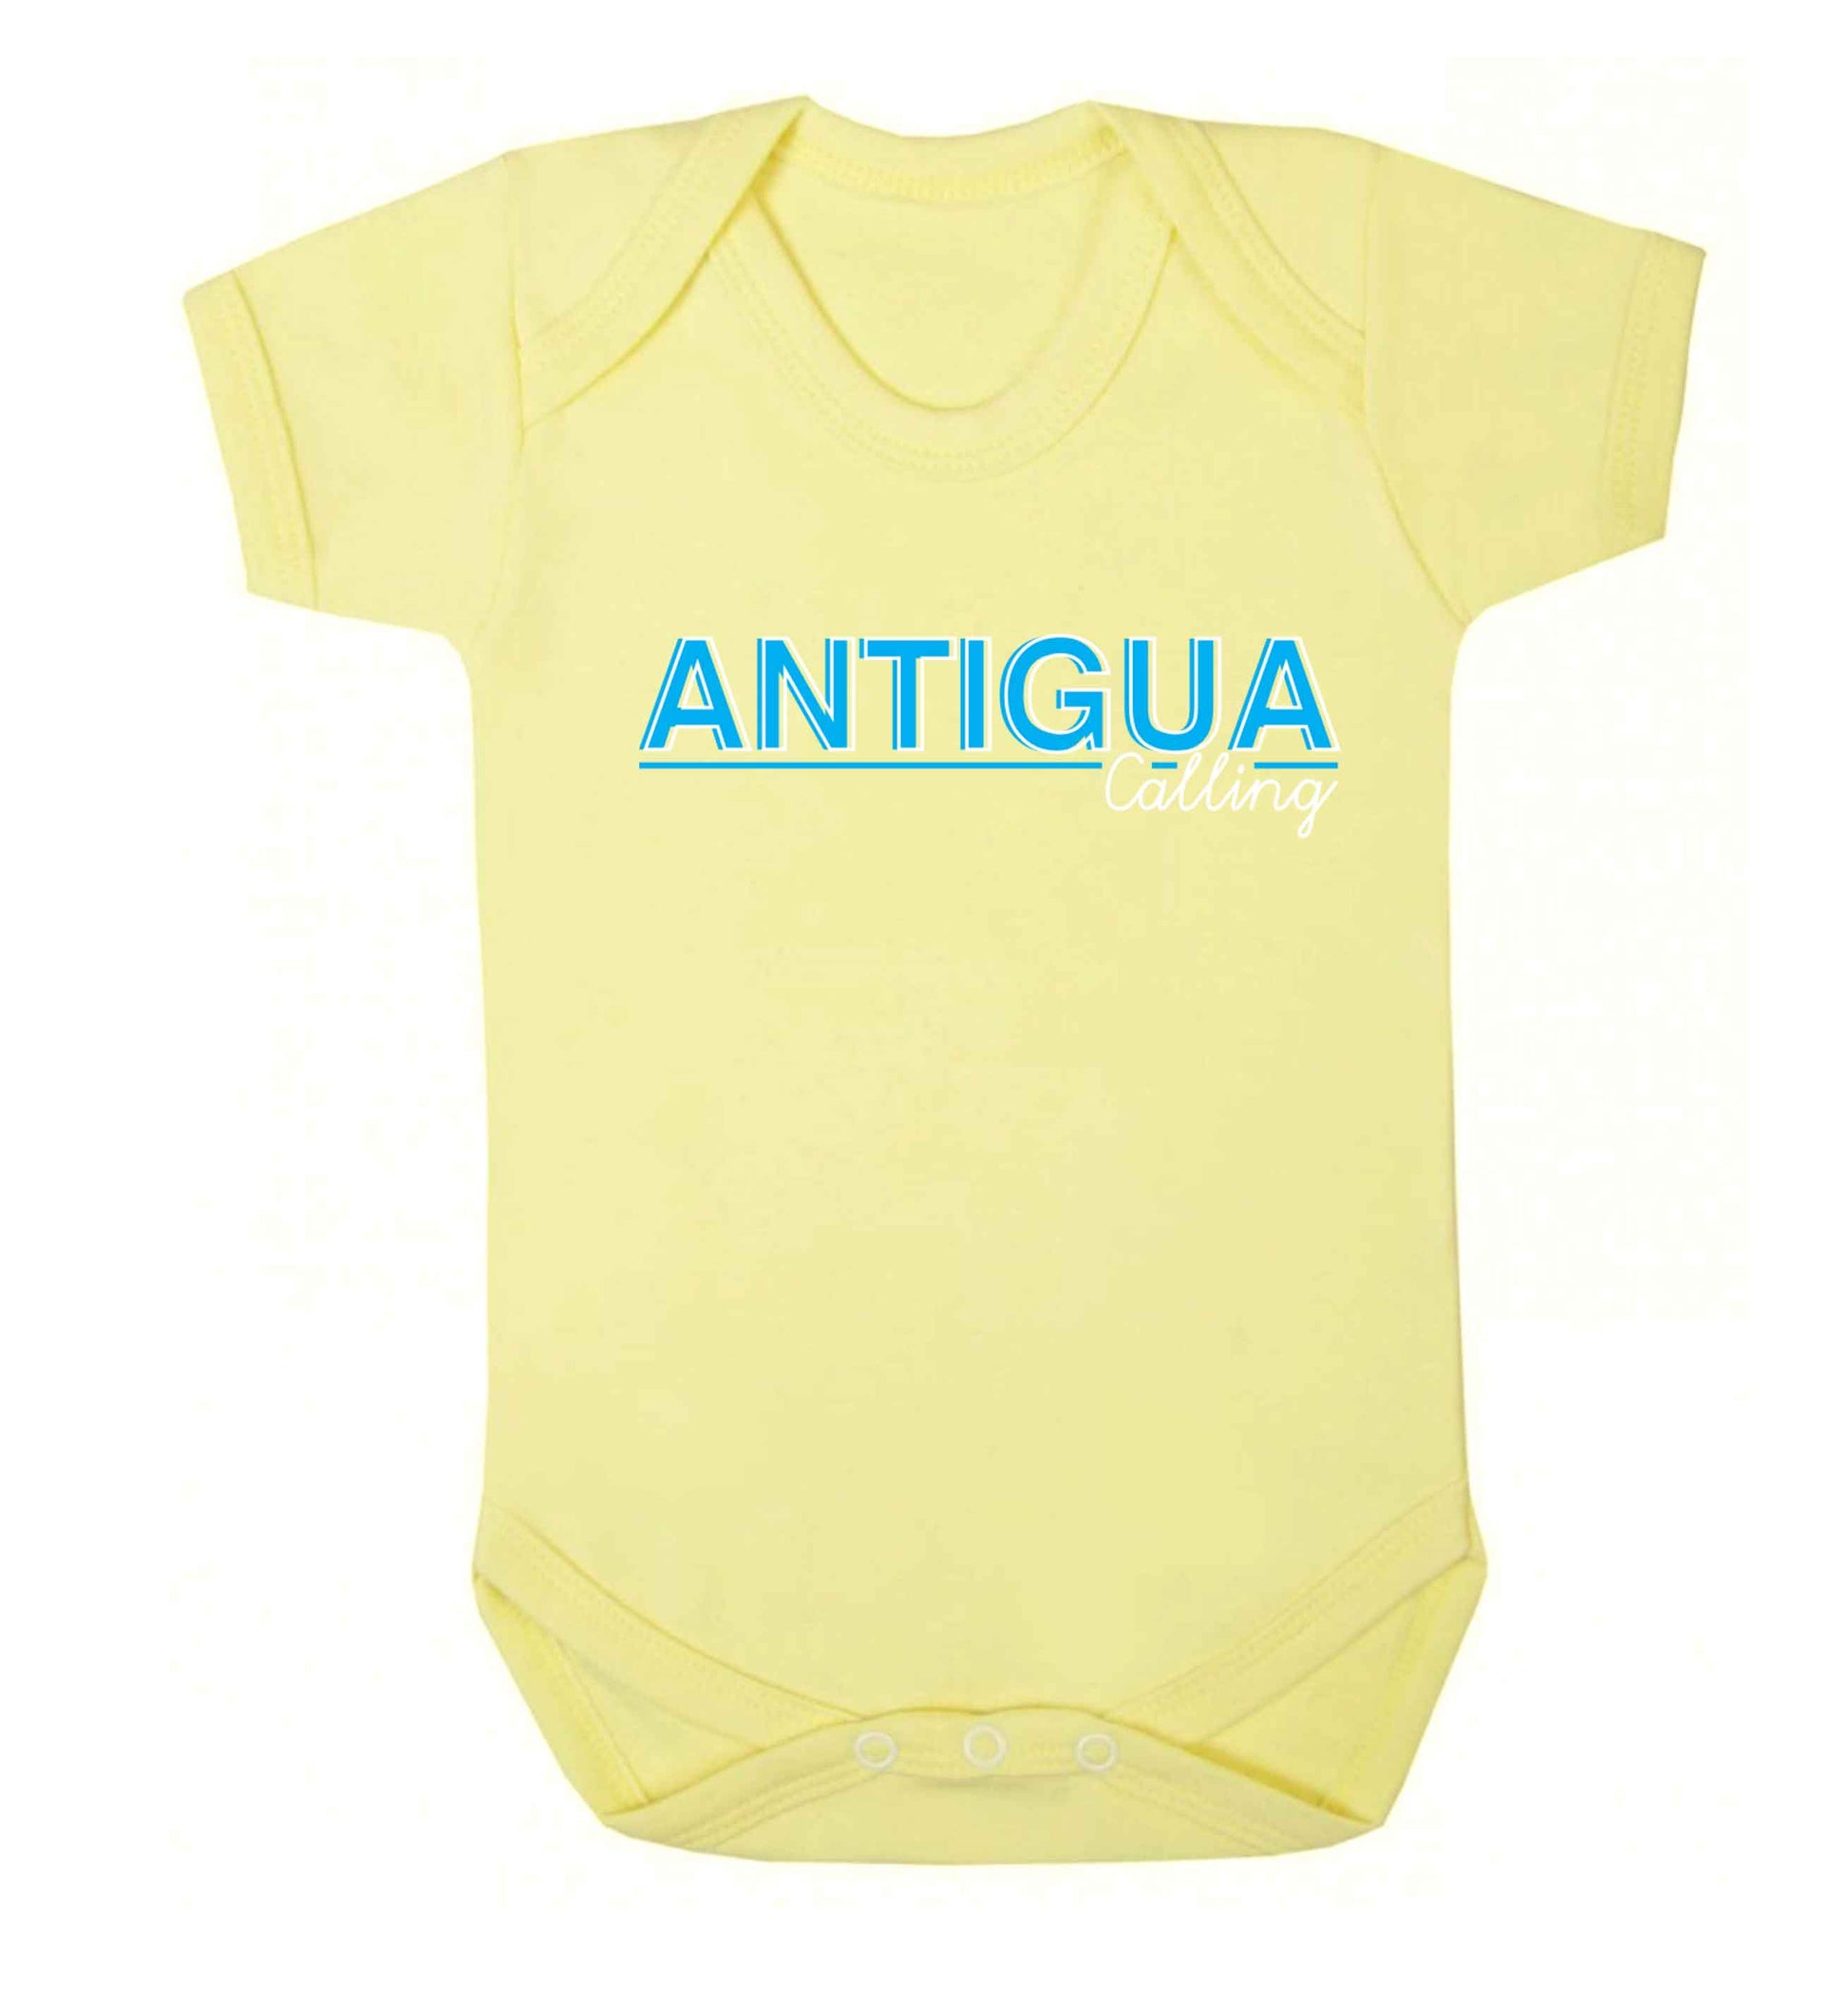 Antigua calling Baby Vest pale yellow 18-24 months